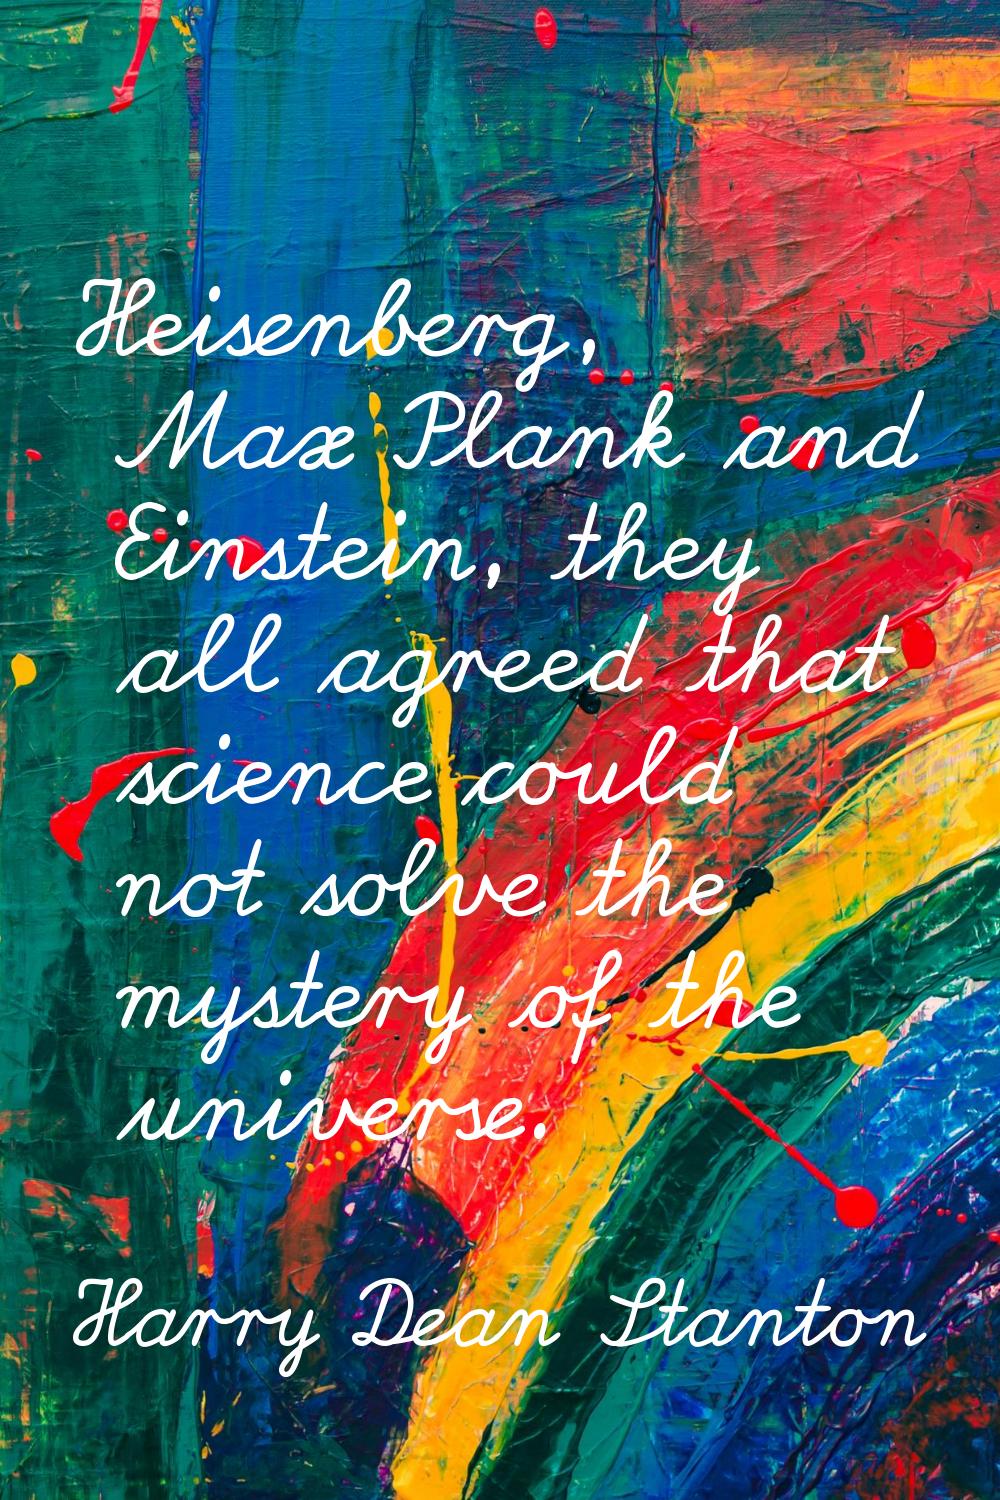 Heisenberg, Max Plank and Einstein, they all agreed that science could not solve the mystery of the